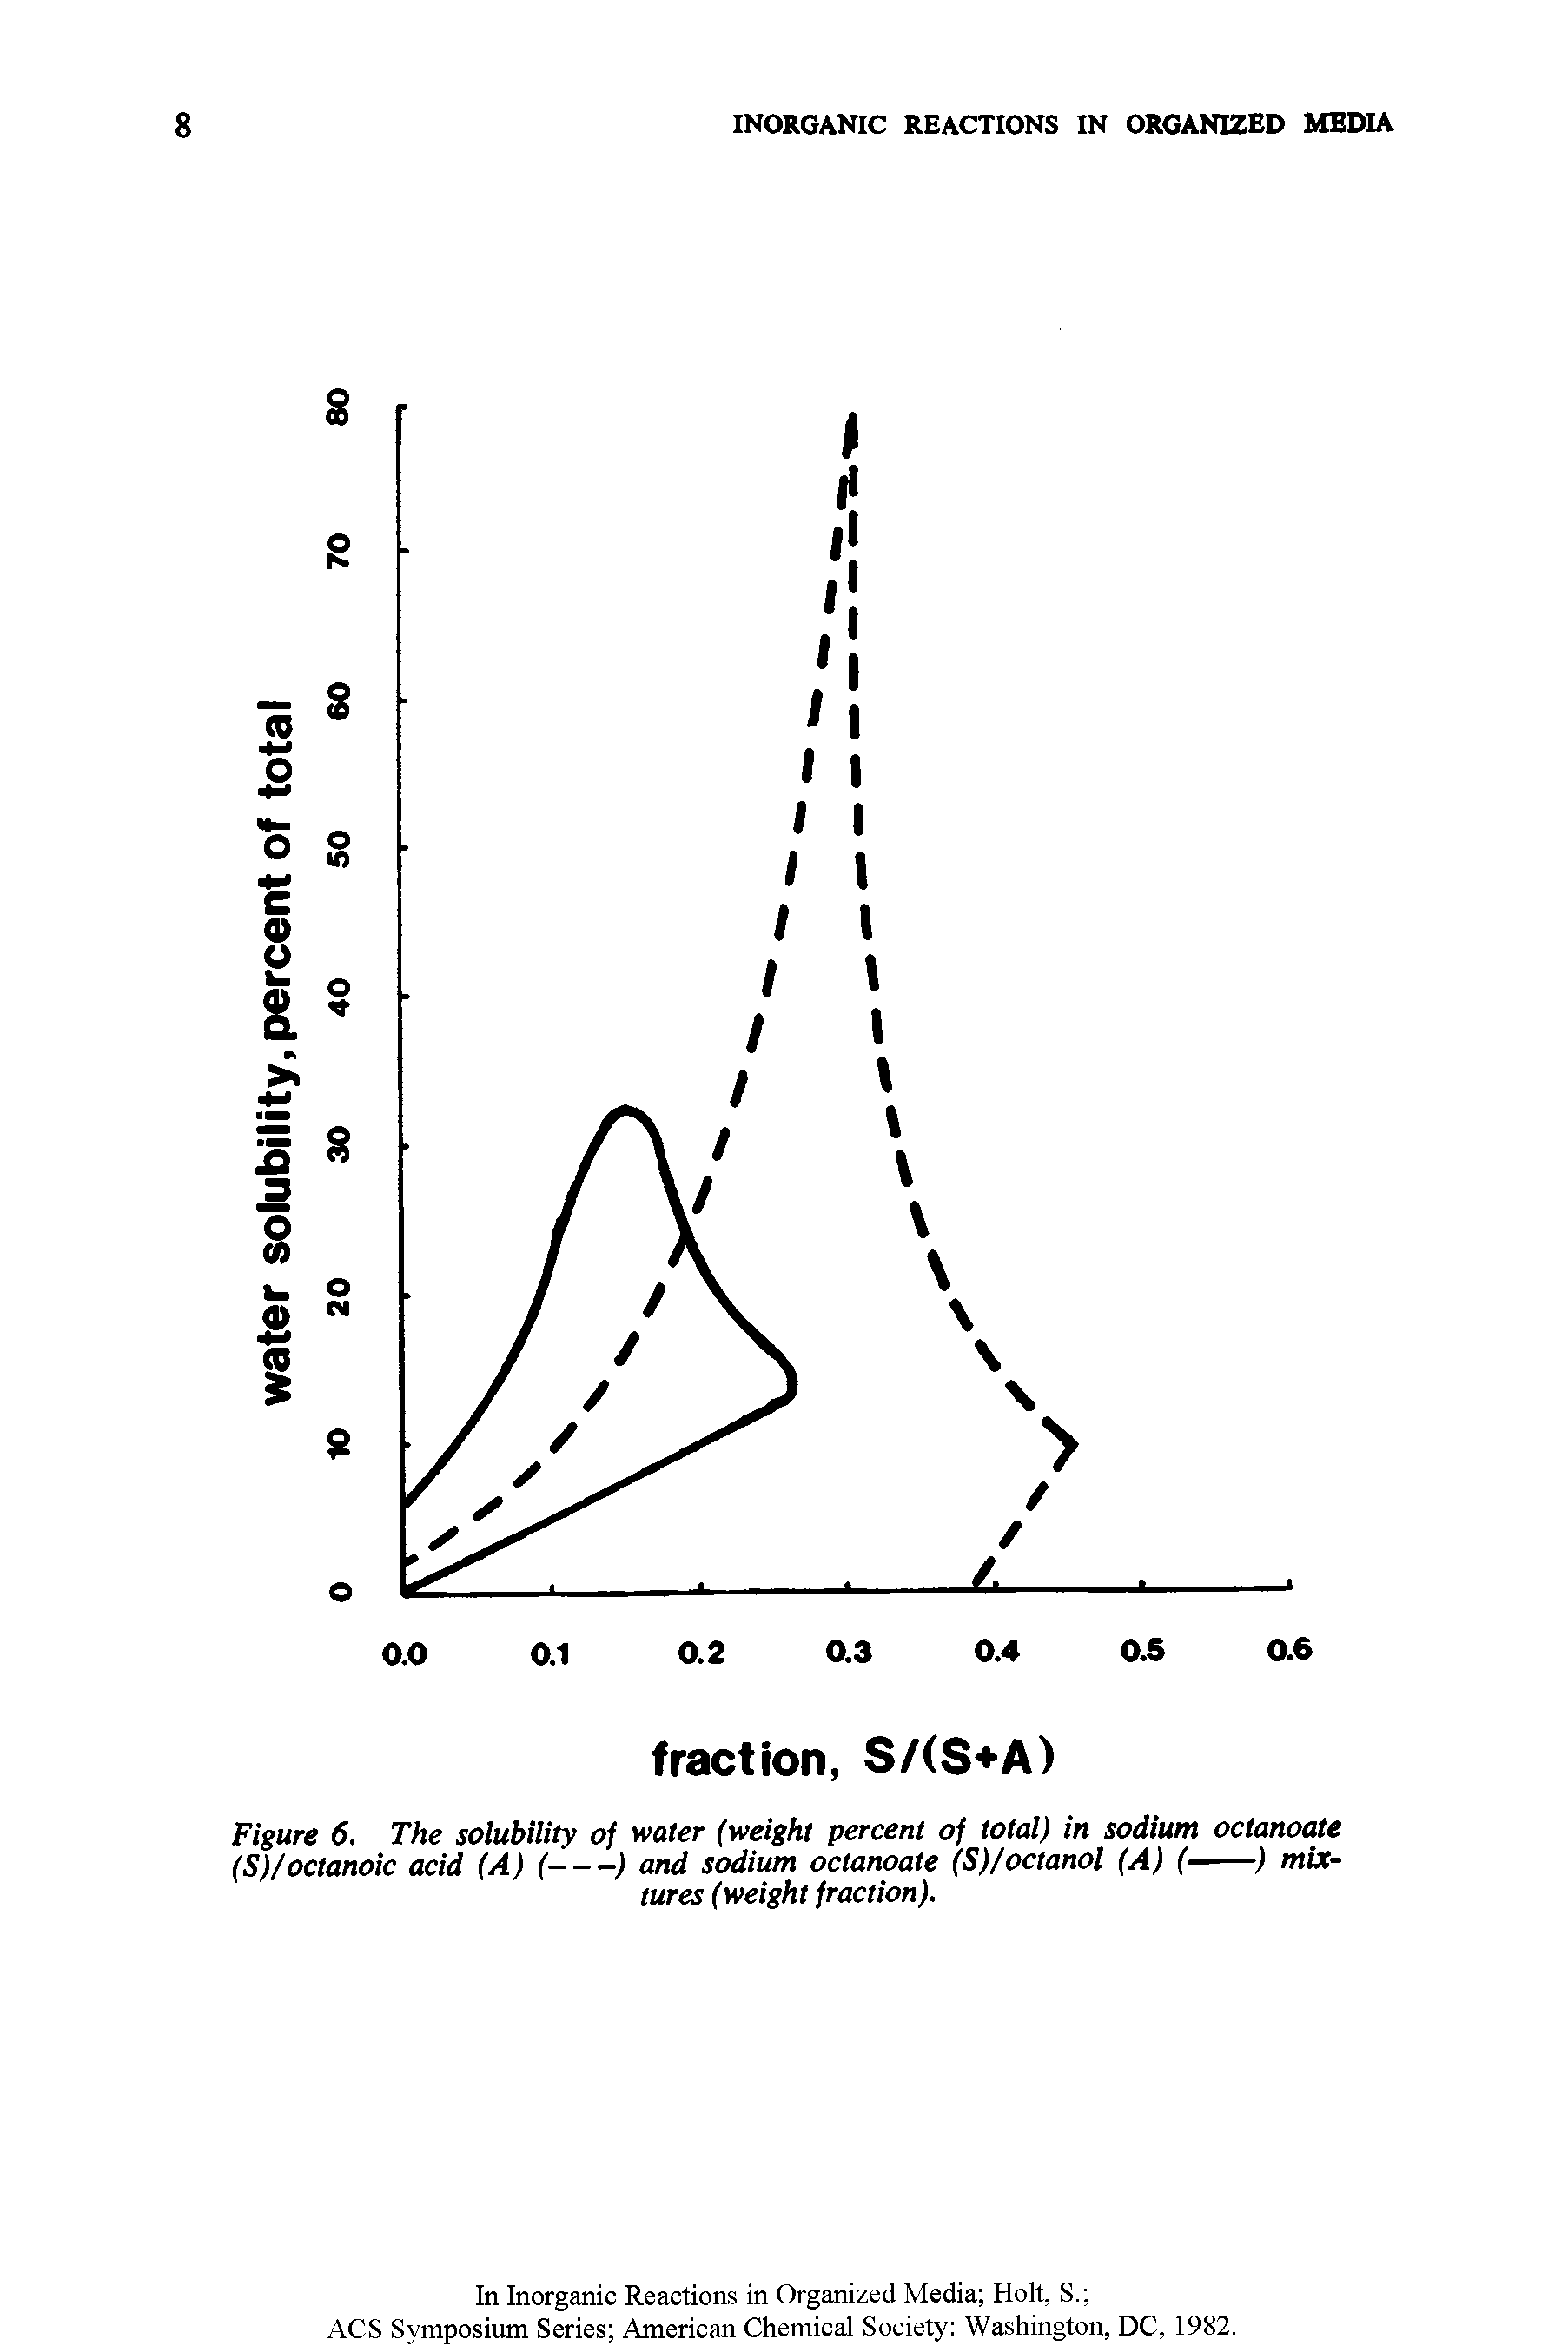 Figure 6. The solubility of water (weight percent of total) in sodium octanoate (S)/octanoic acid (A) --) and sodium octanoate (S)/octanol (A) (---) mix-...